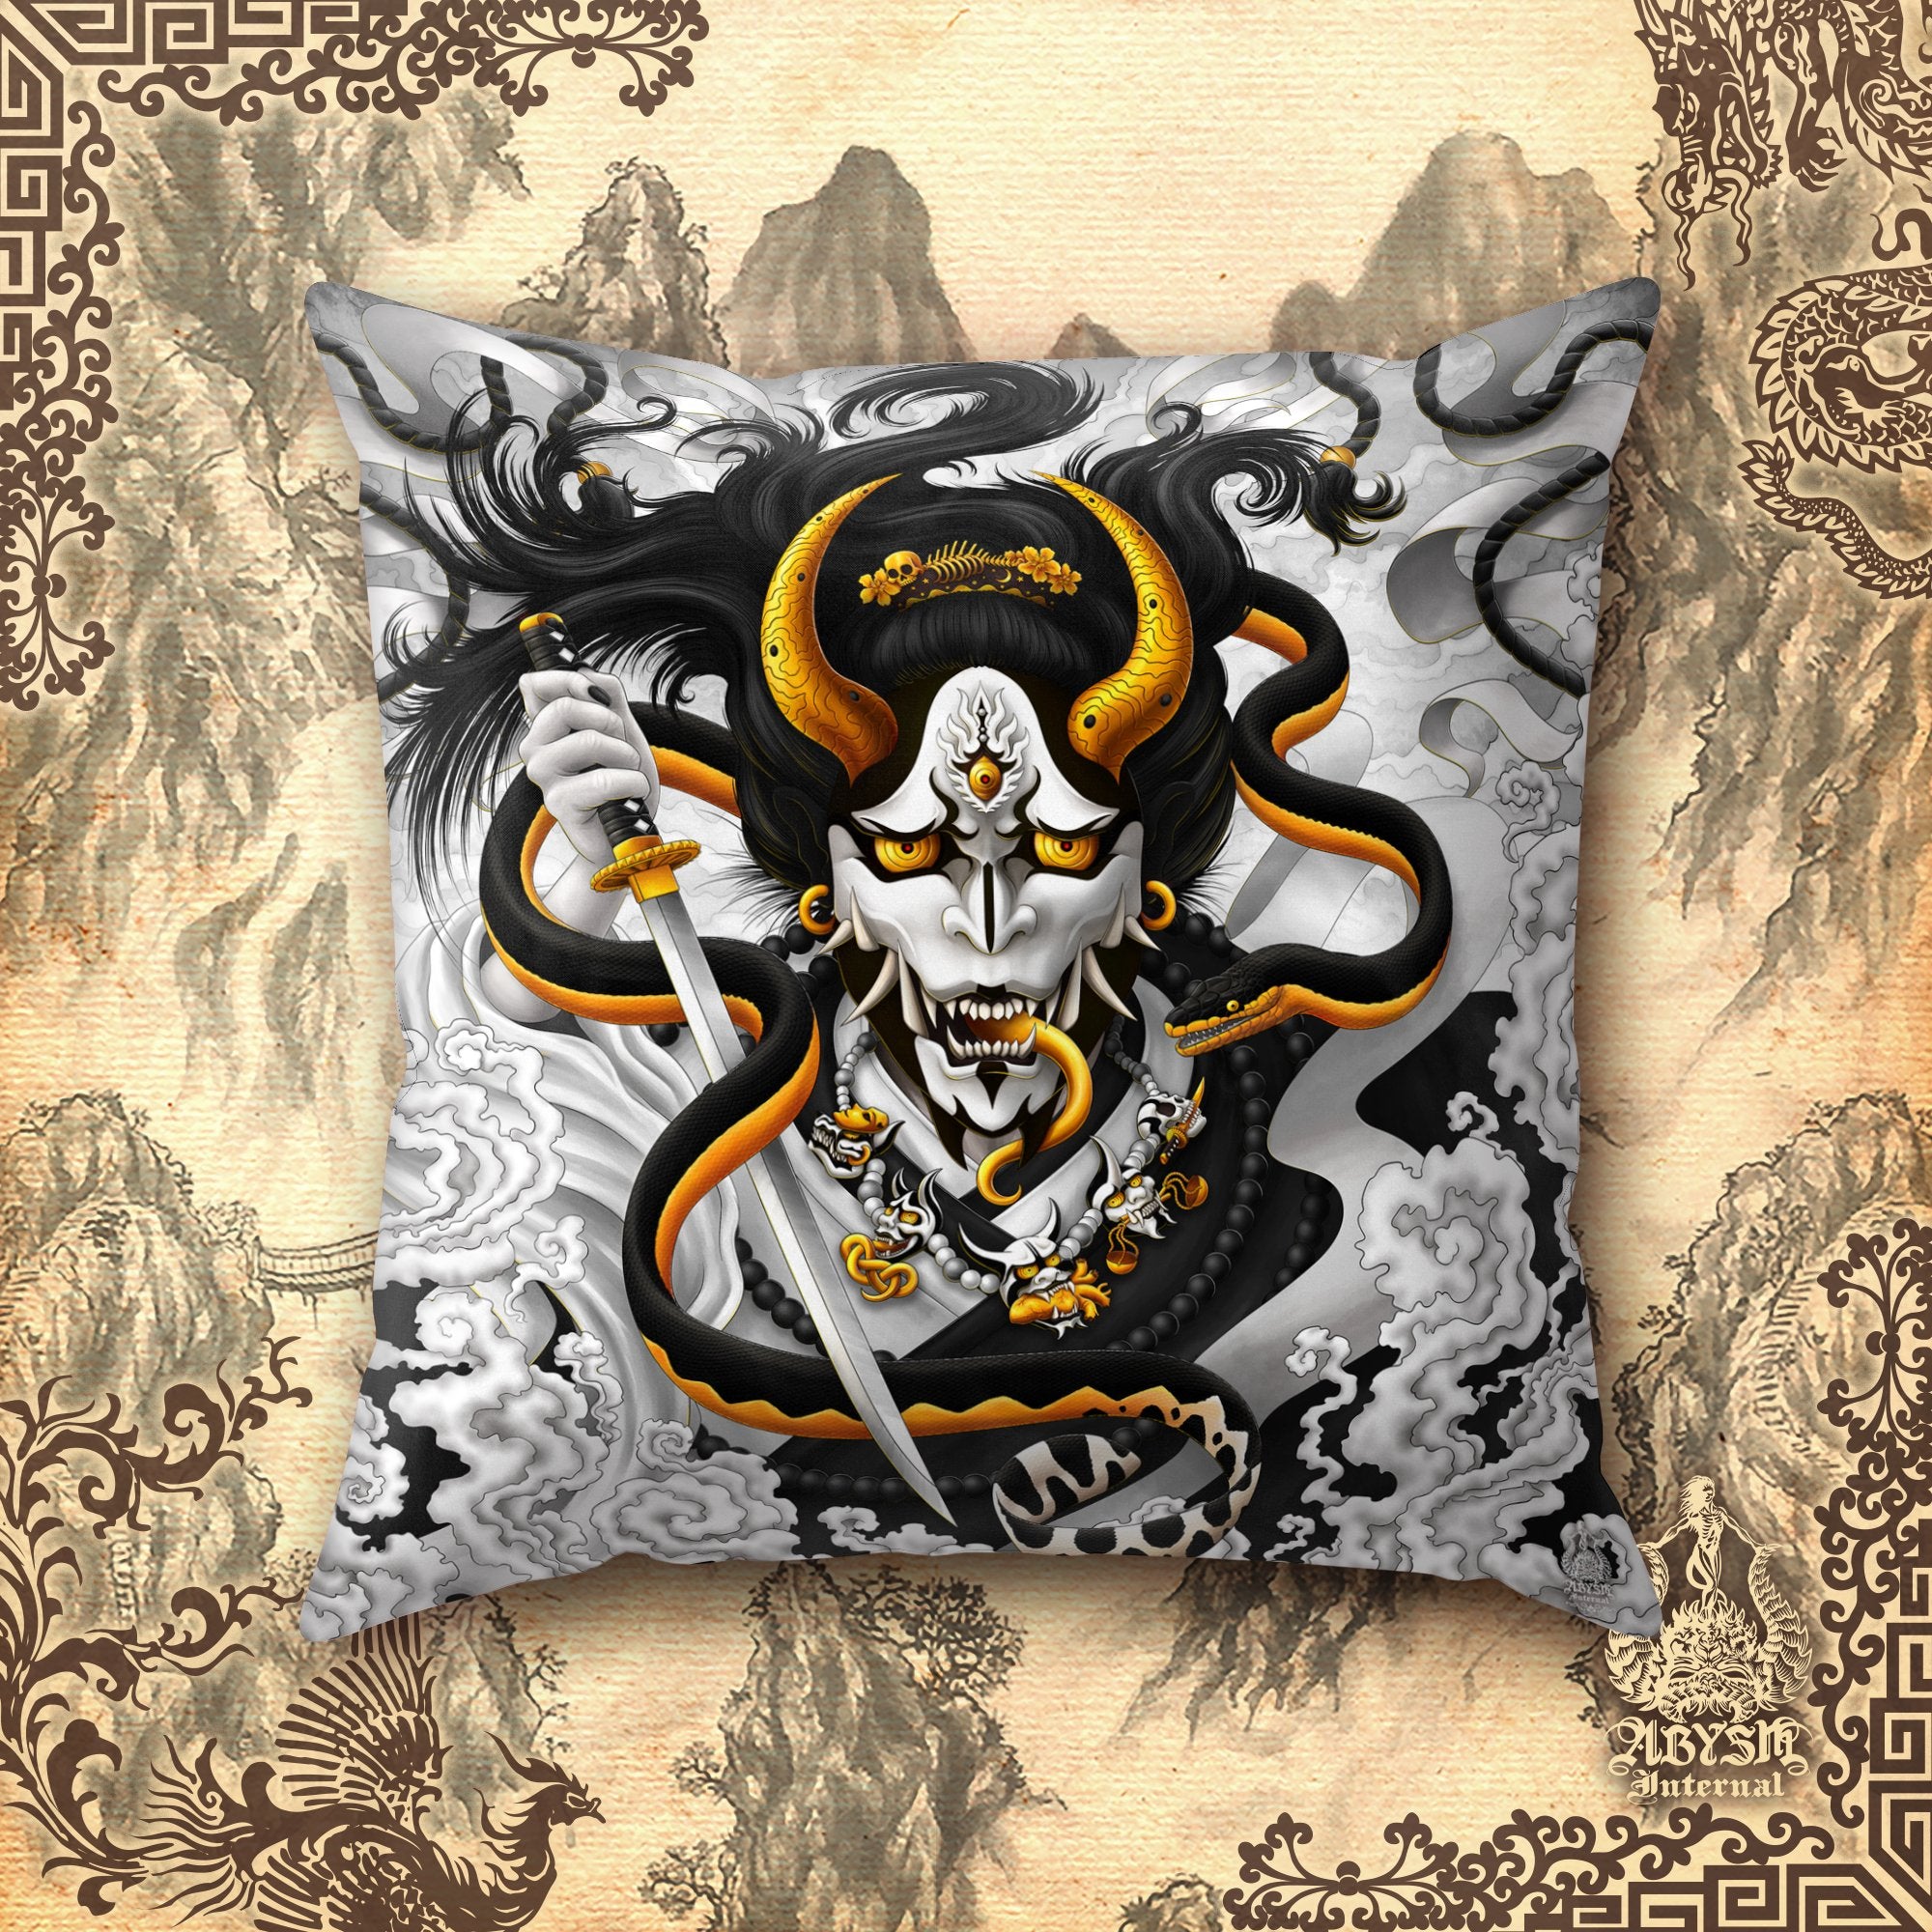 White and Black Hannya Throw Pillow, Decorative Accent Pillow, Square Cushion Cover, Japanese Demon & Snake, Anime Room Decor - Abysm Internal